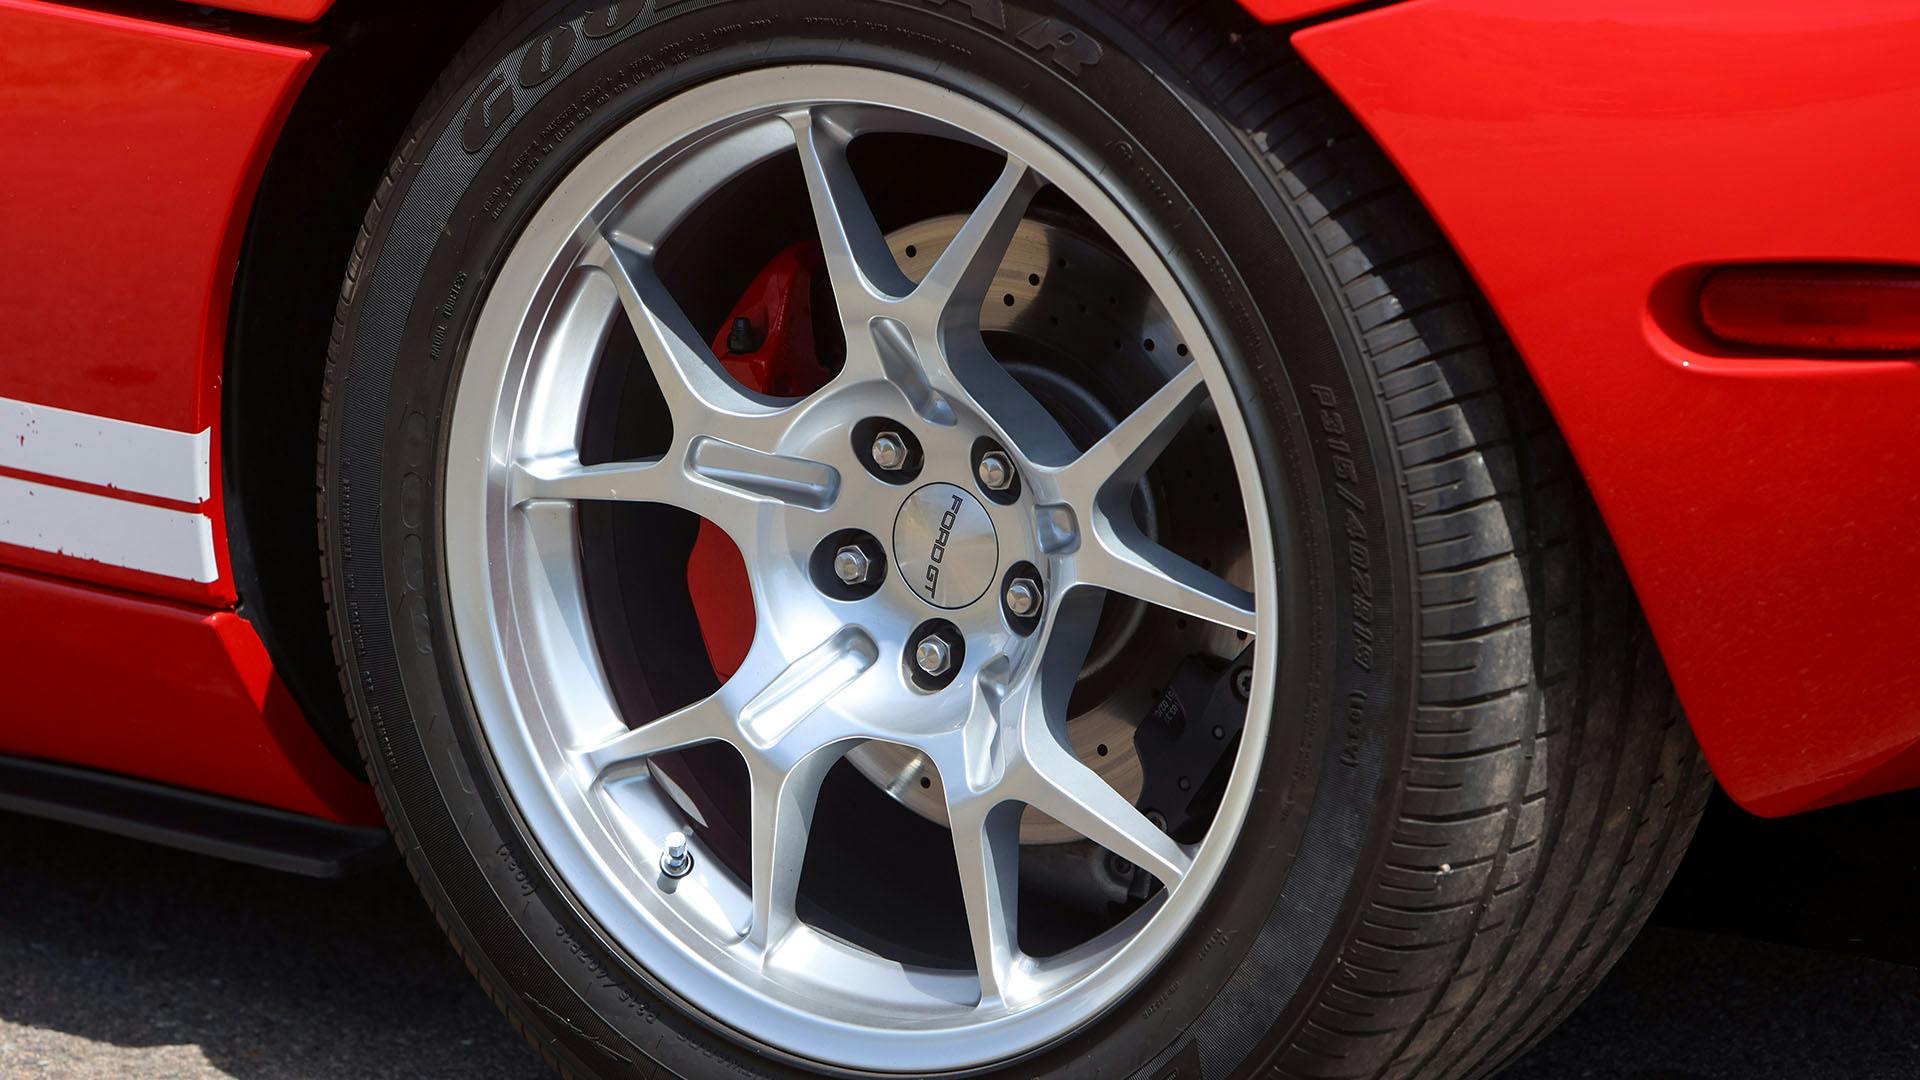 2005 Ford GT wheel tire